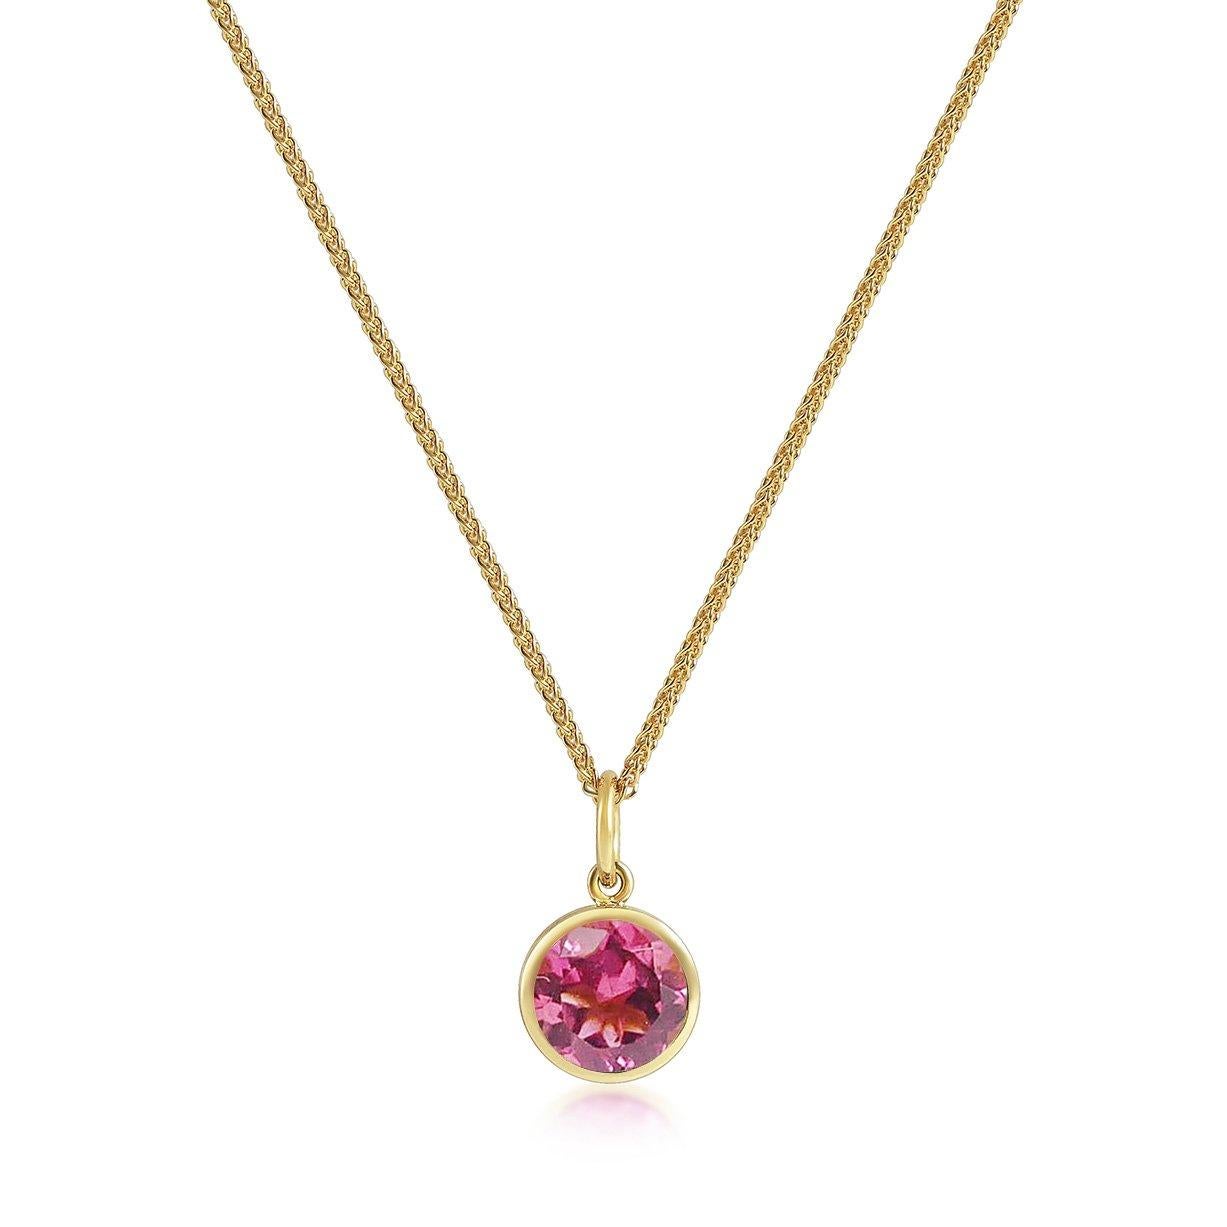 Round Cut Handcrafted 1.30 Carats Pink Tourmaline 18 Karat Yellow Gold Pendant Necklace For Sale